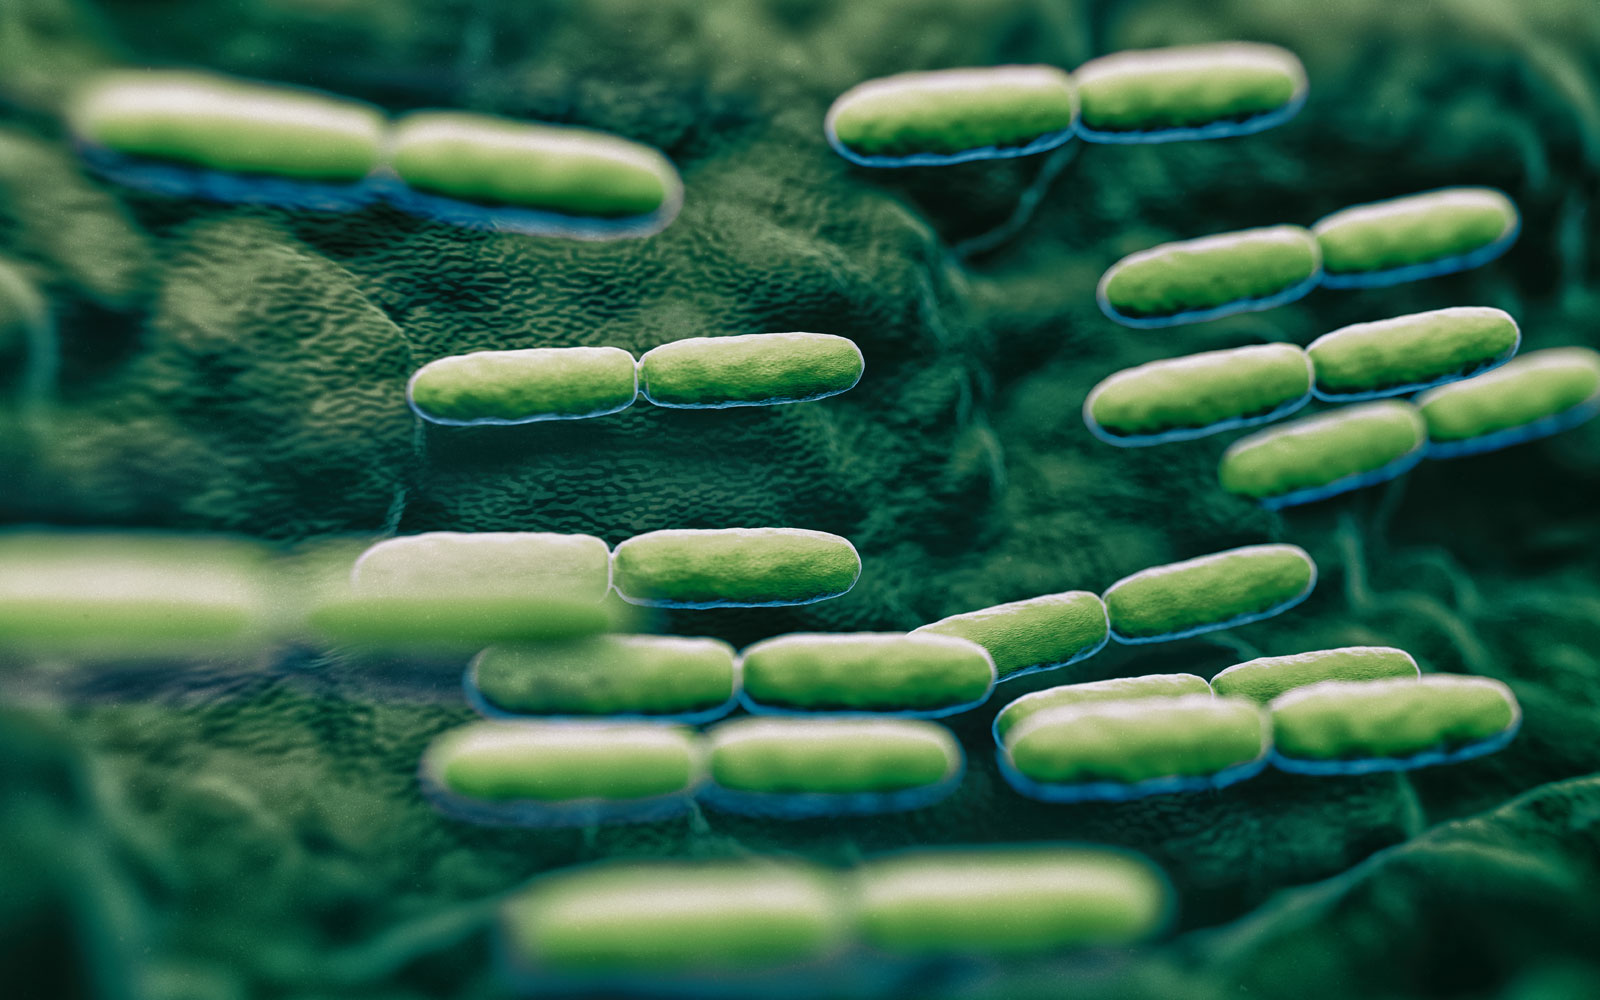 A close-up image of green bacteria.